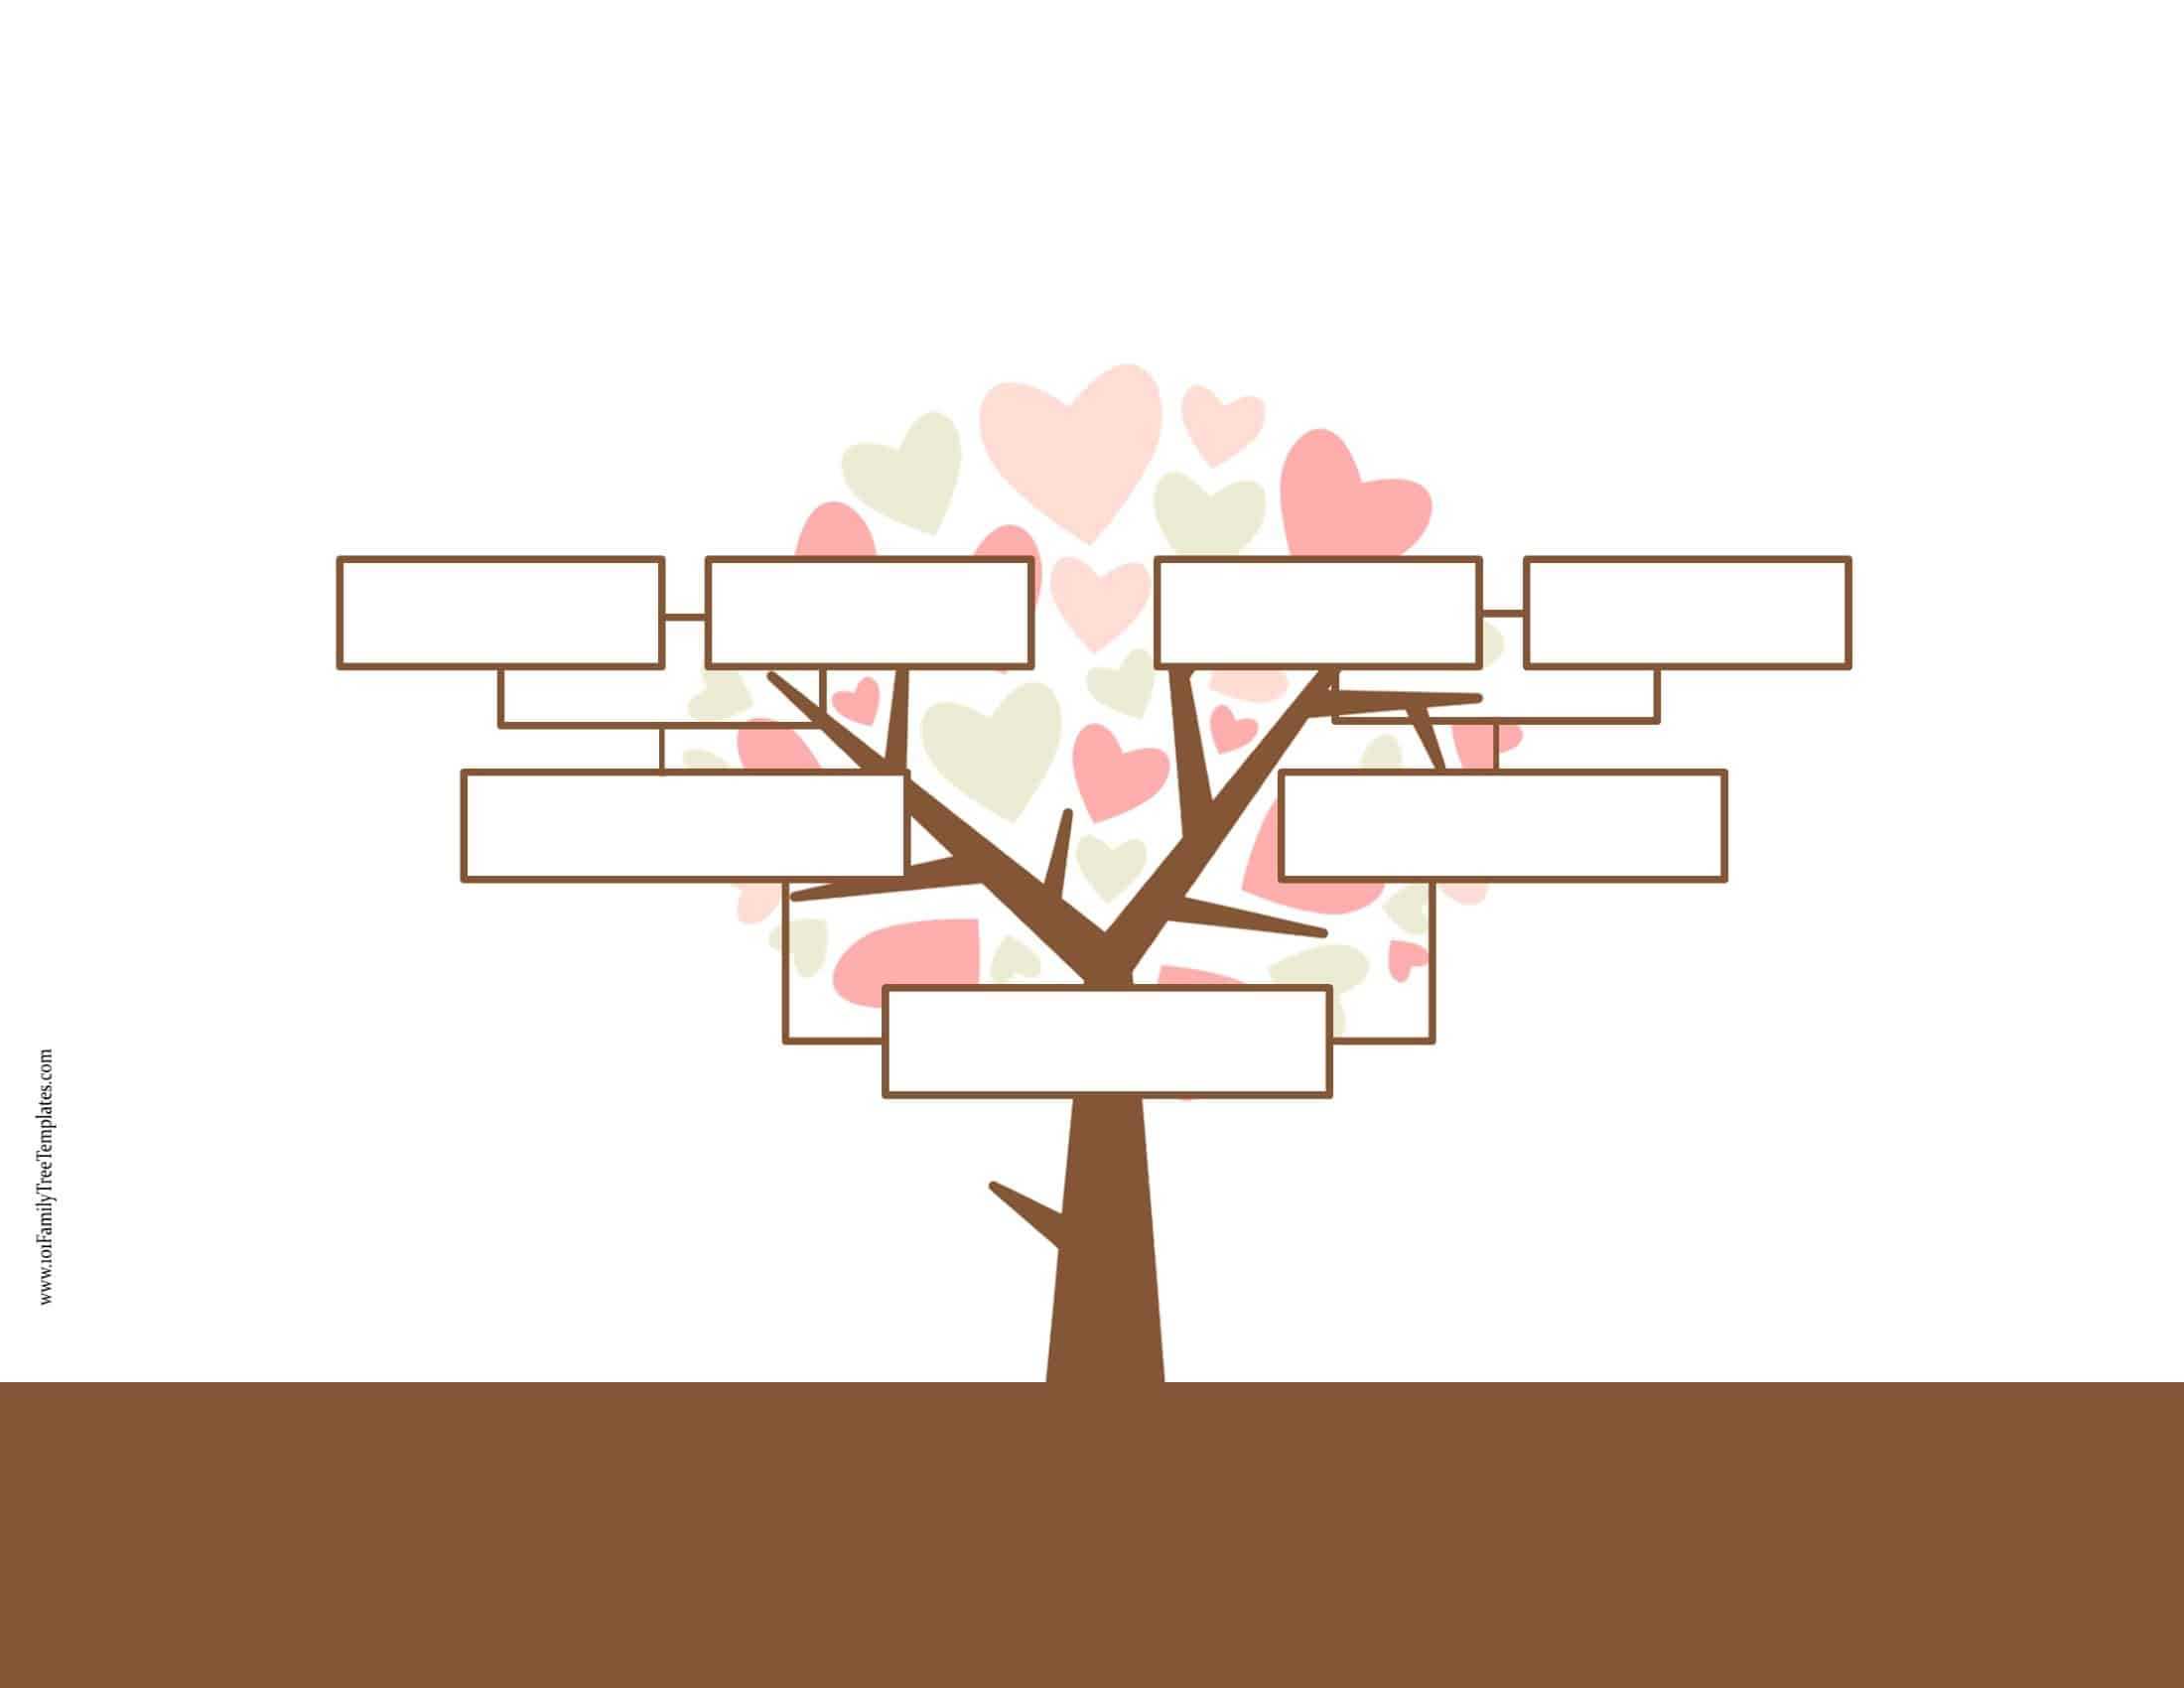 Blank Family Tree Template | Free Instant Download For Blank Family Tree Template 3 Generations